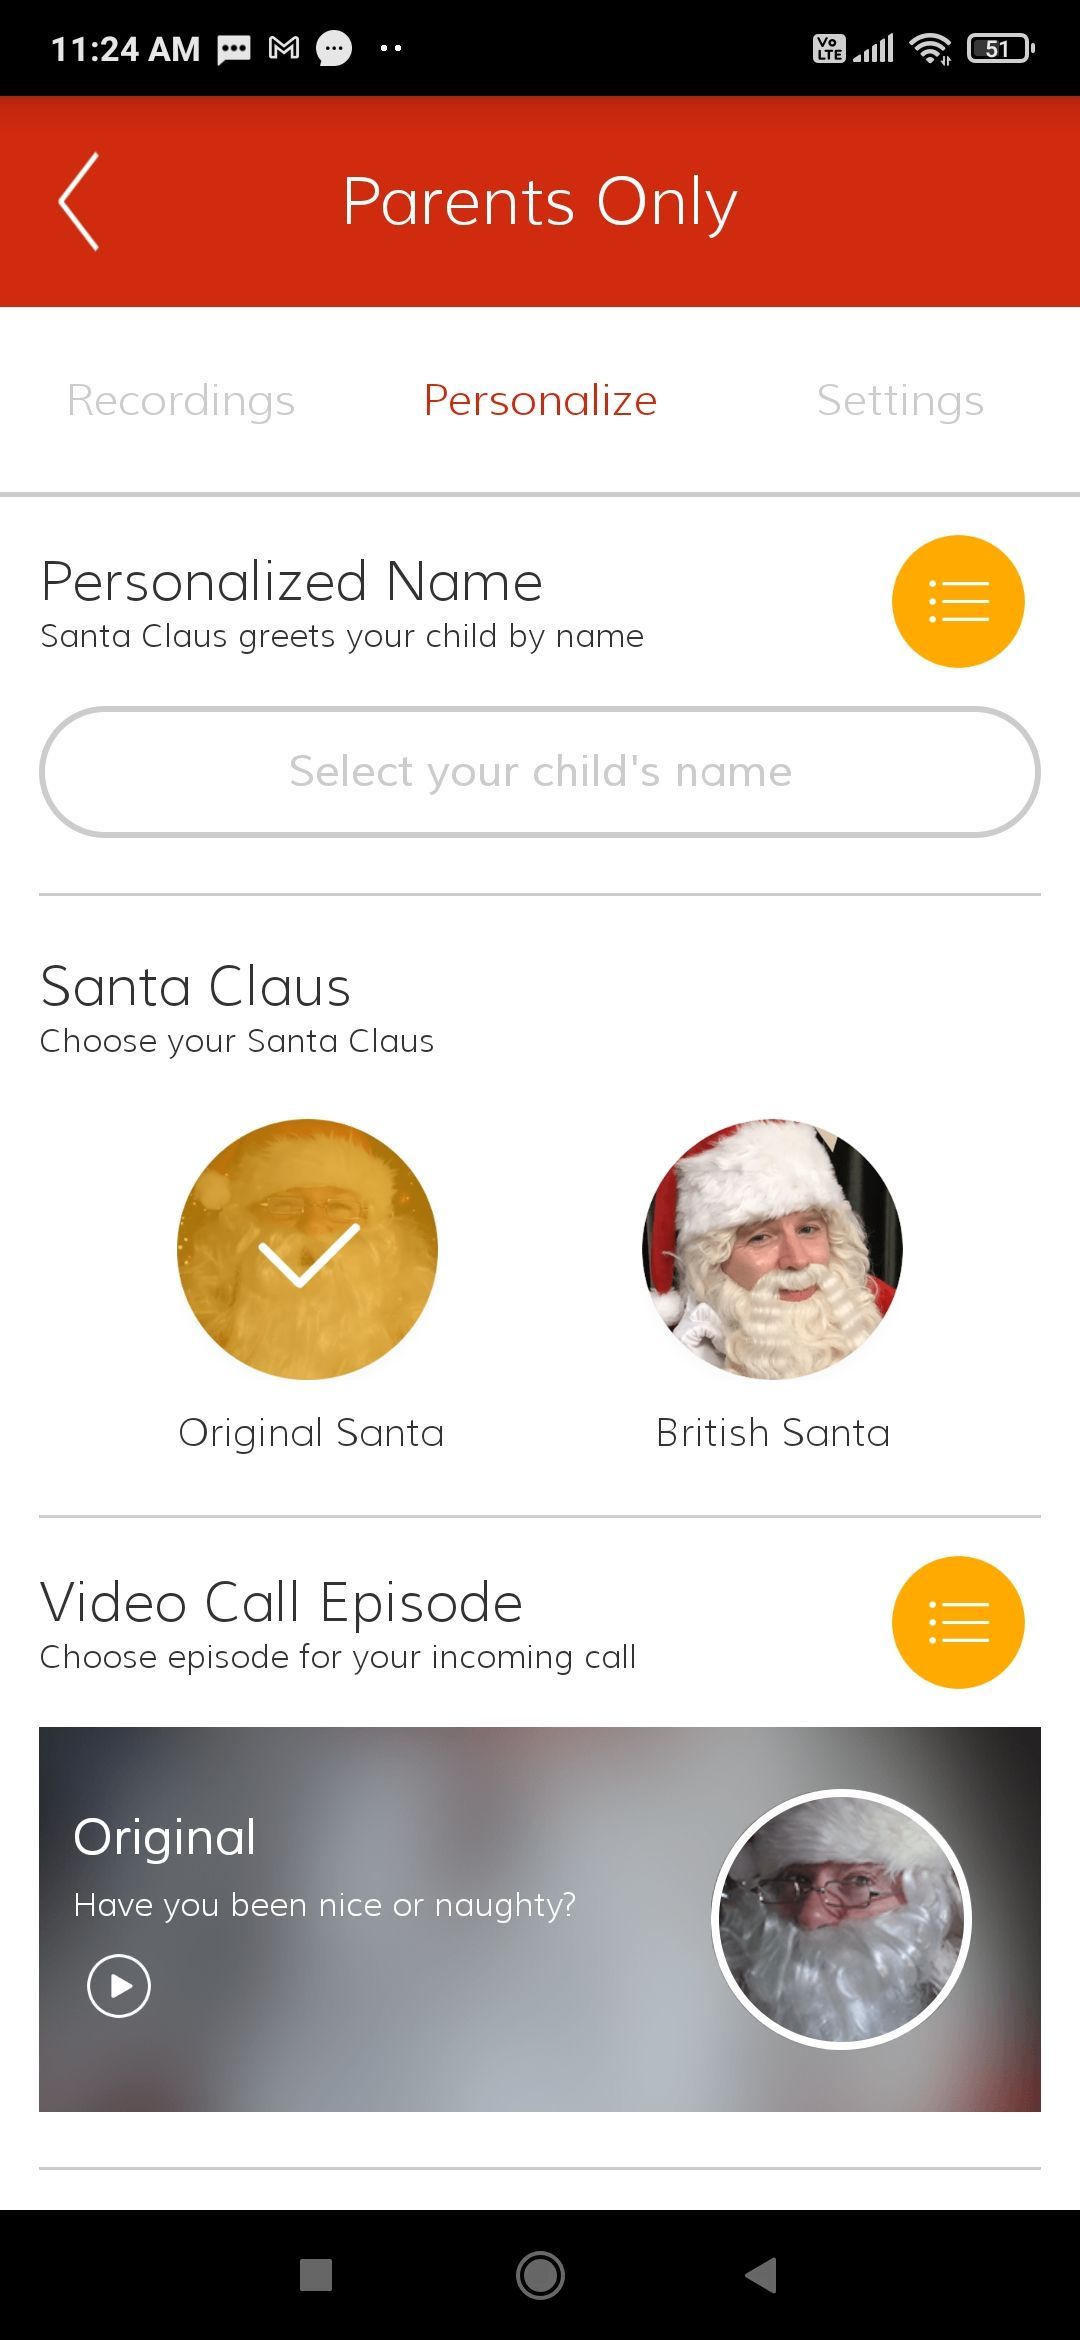 Parents can customize Video Call Santa based on their children's interests